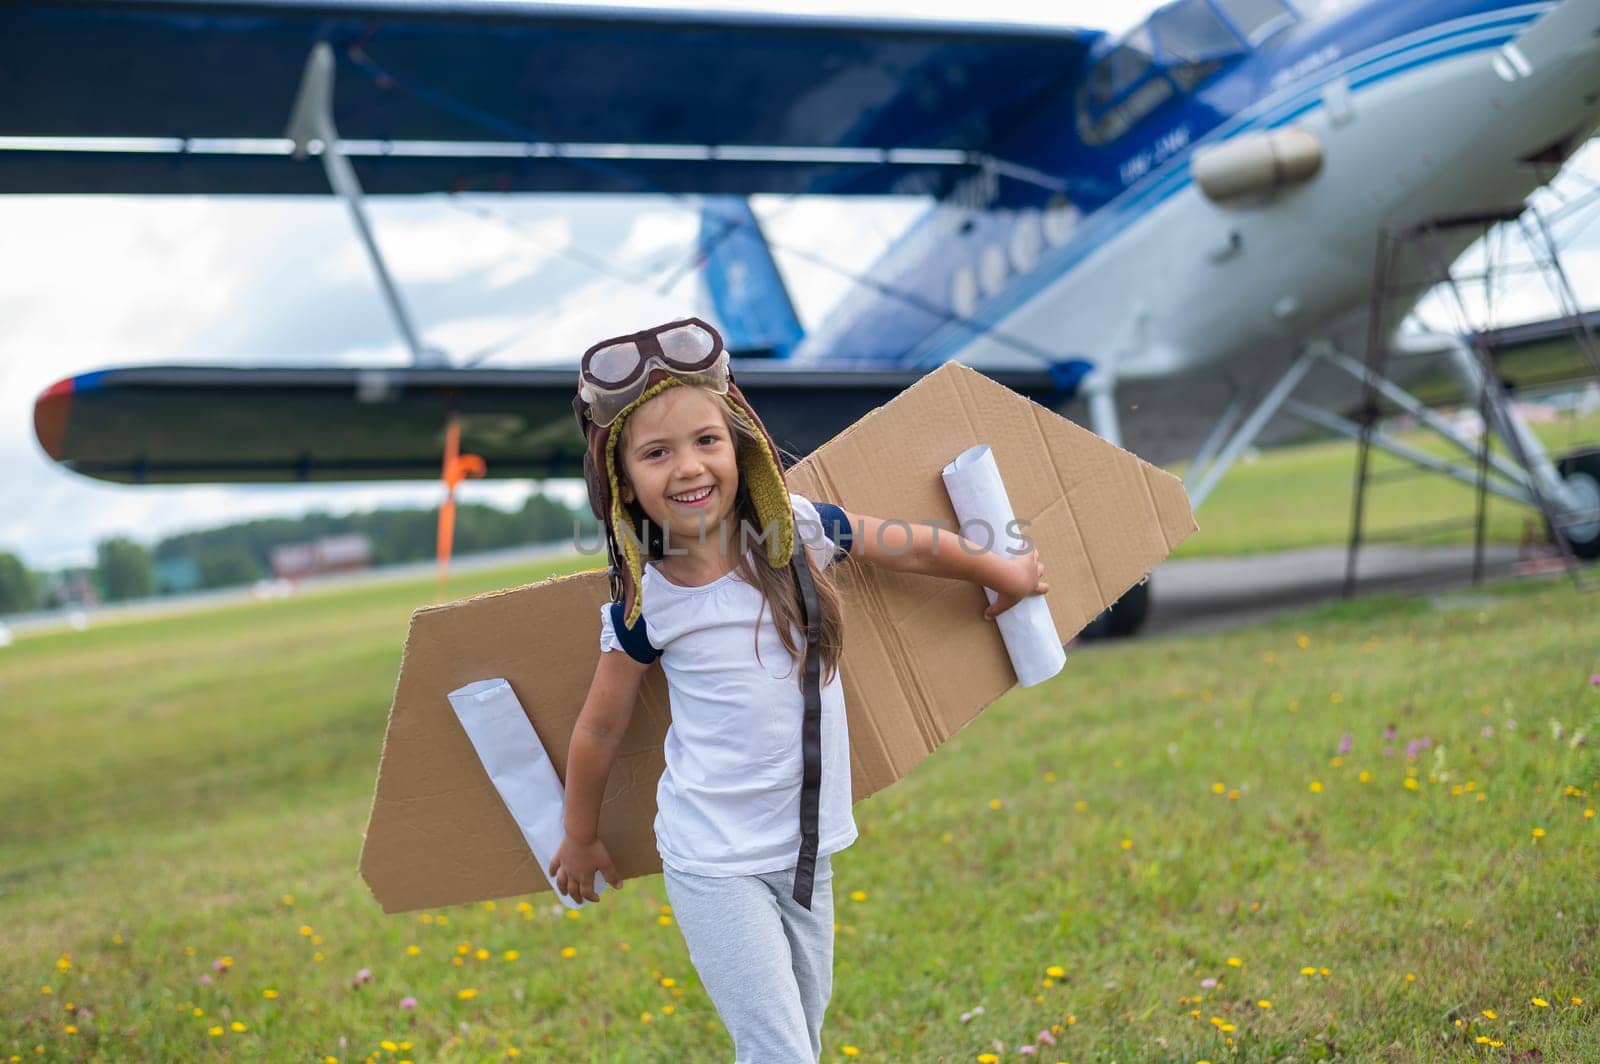 A little girl in a pilot's costume with cardboard wings runs on the lawn against the backdrop of the plane. A child in a hat and glasses dreams of flying on an airplane. by mrwed54